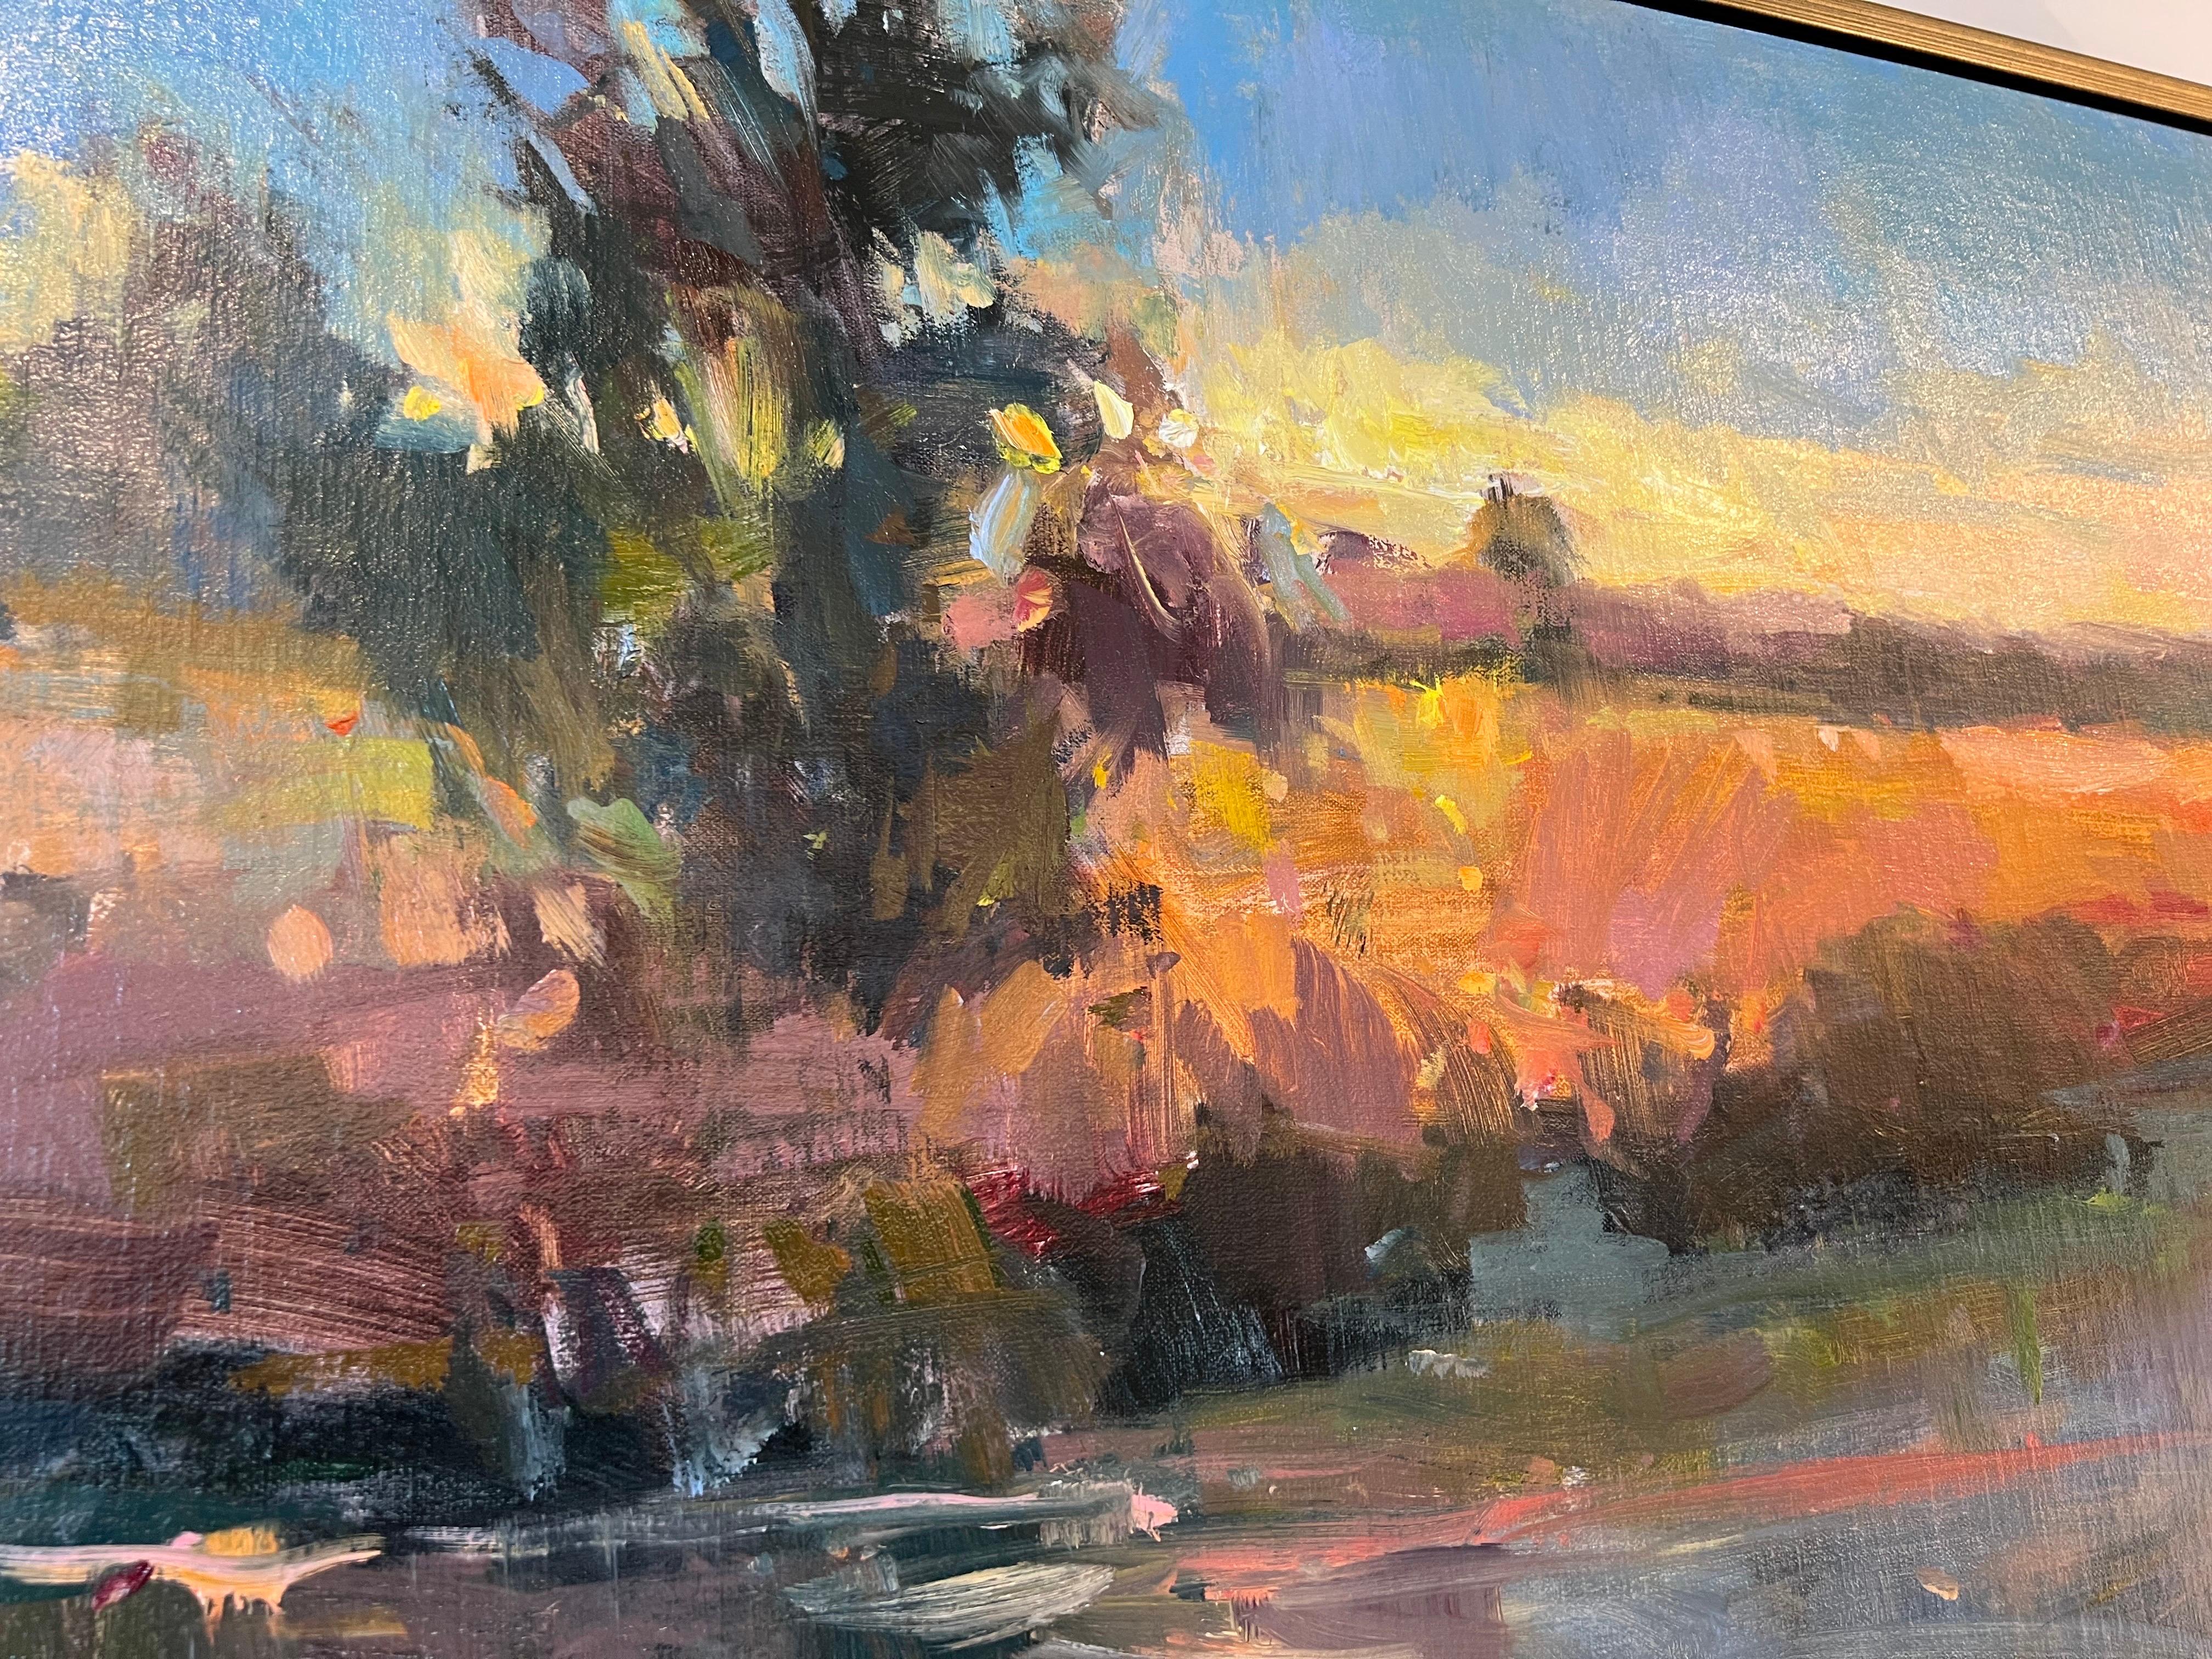 'Late Evening Lowland' is a framed Impressionist plein air landscape painting created by American artist Millie Gosch in 2022. Featuring a rich palette mostly made of blue, green, pink and orange tones, this oil on canvas painting.  Framed inside an